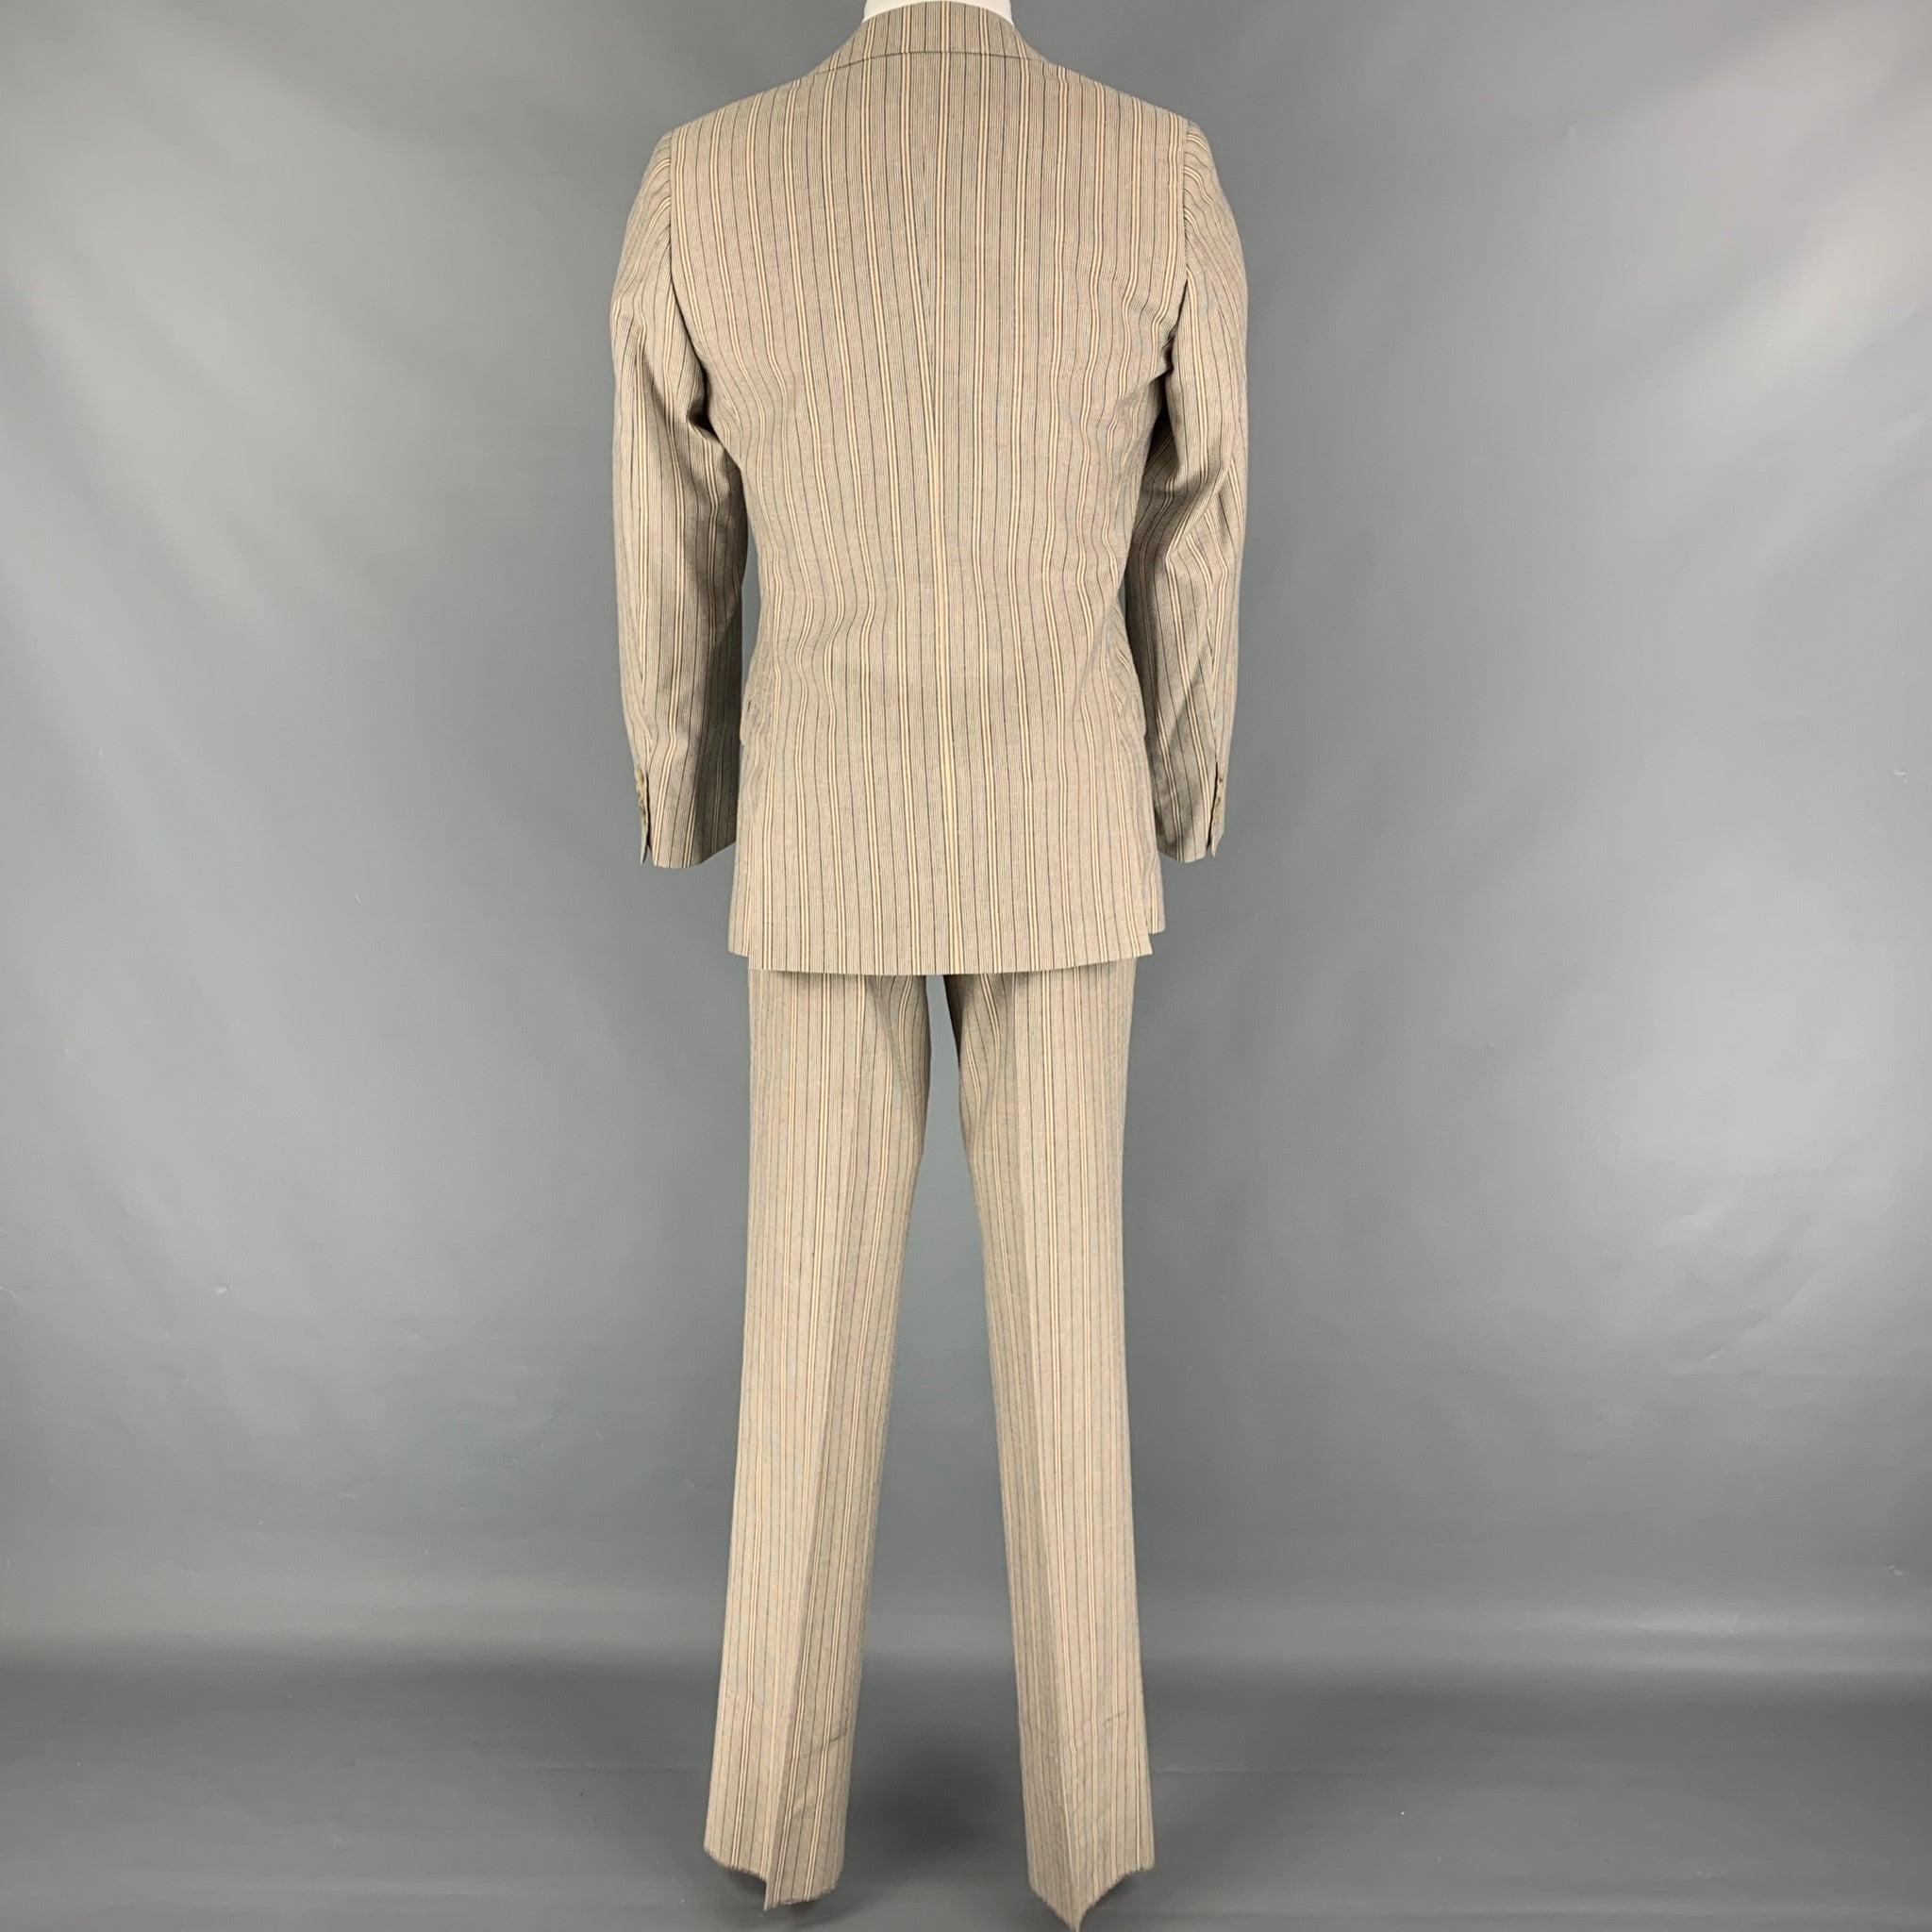 D&G by DOLCE & GABBANA Size 36 Khaki Navy Stripe Polyester Notch Lapel Suit In Good Condition For Sale In San Francisco, CA